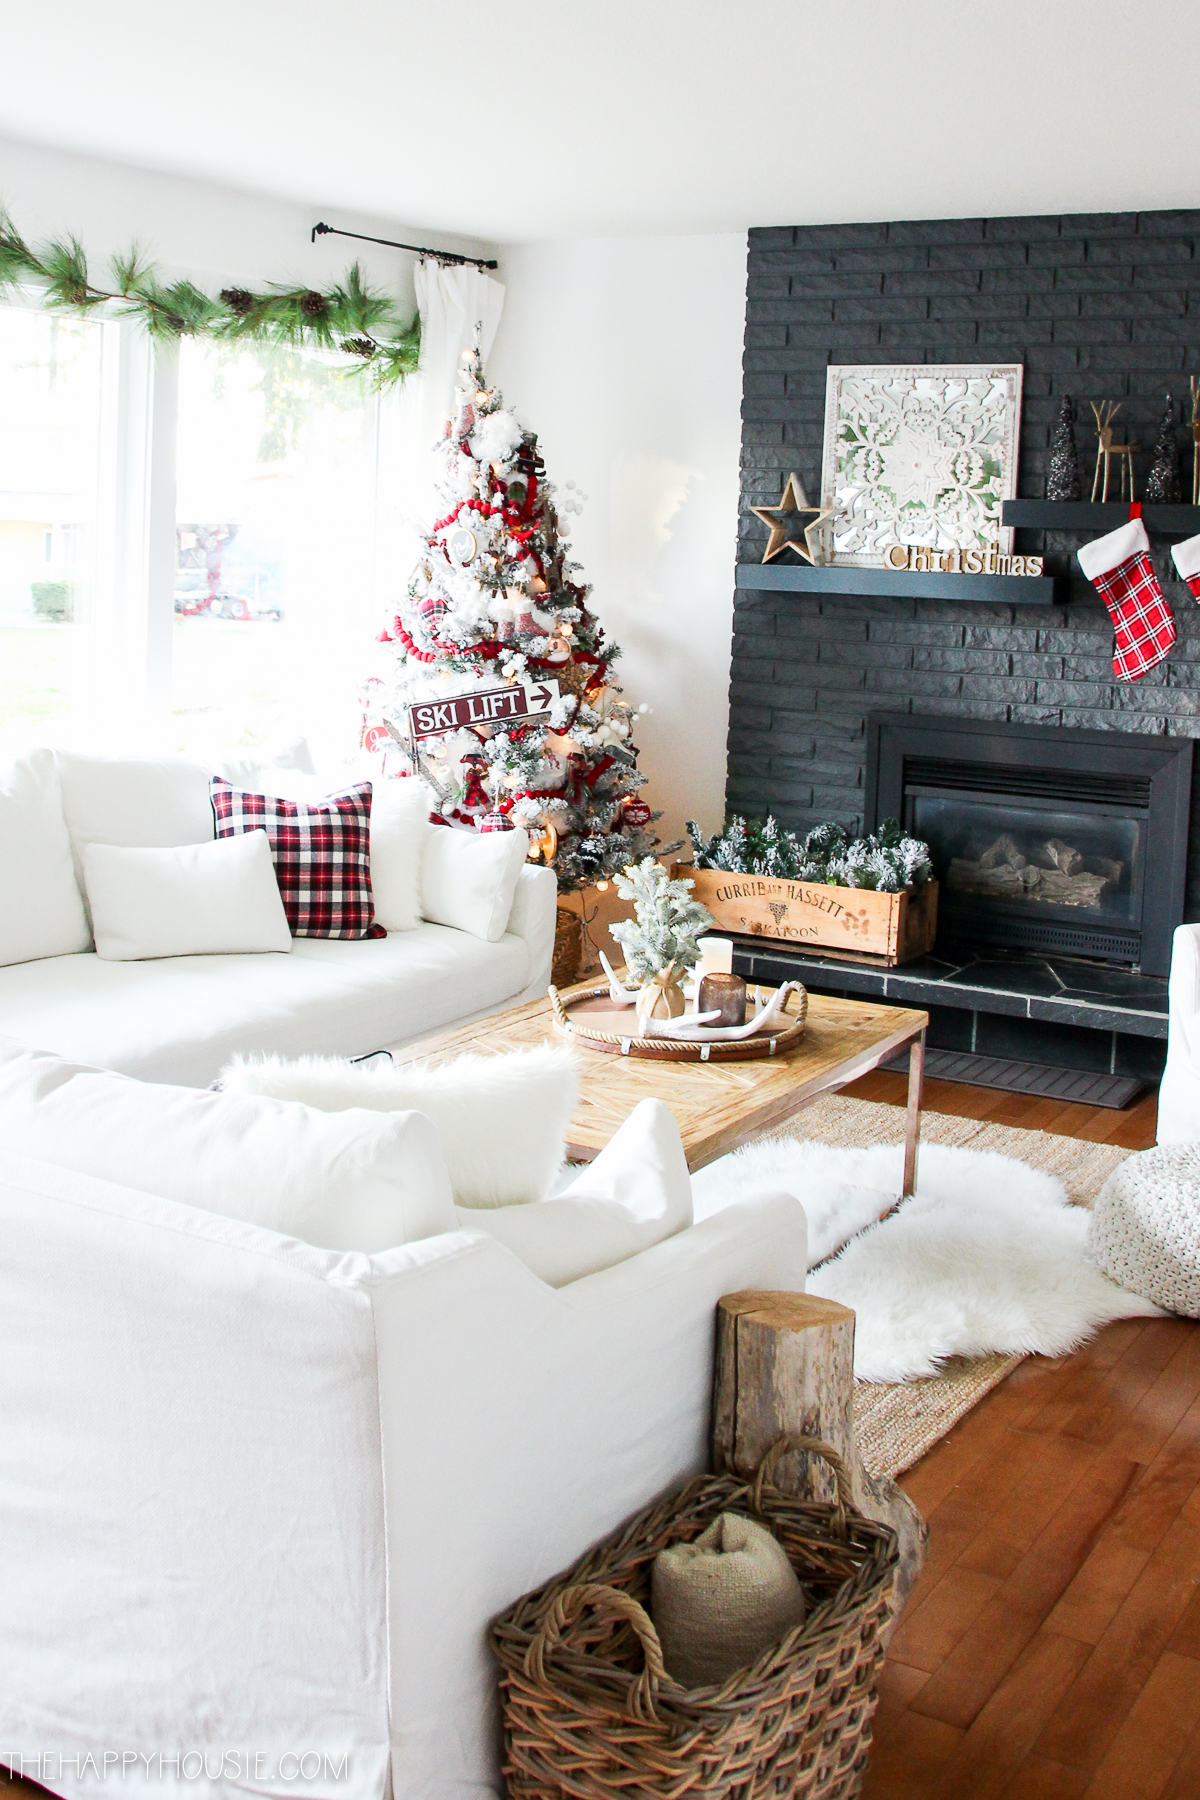 https://www.thehappyhousie.com/wp-content/uploads/2018/12/red-and-white-christmas-decorating-ideas-christmas-living-room-tour-at-the-happy-housie-34.jpg